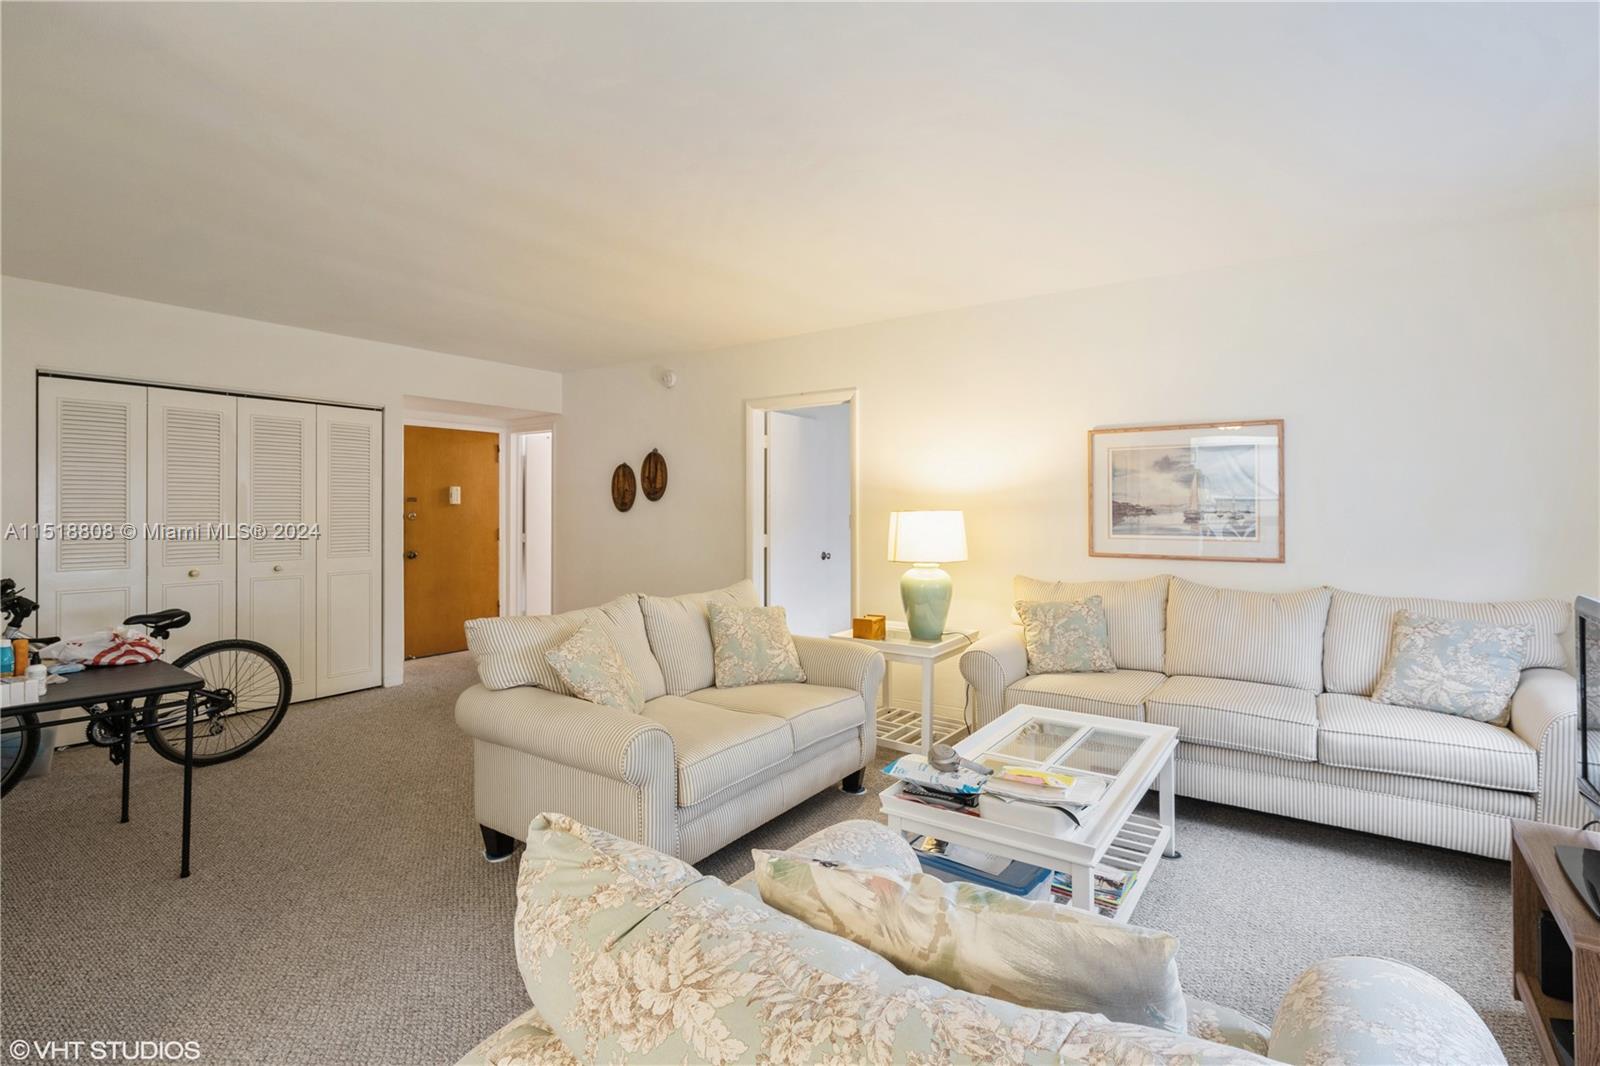 Prime Location in the Heart of Bay Harbor Islands! This spacious unit boasts an excellent location, just a stroll away from the local A-rated school, shops, restaurants, and the beach. Nestled in a boutique secured building, it offers the convenience of assigned parking, a bicycle area, and a resident's pool. Spacious unit with lots of windows for abundant natural light, central AC and 2 bedrooms/2 bathrooms. Easy to show, schedule your viewing today!